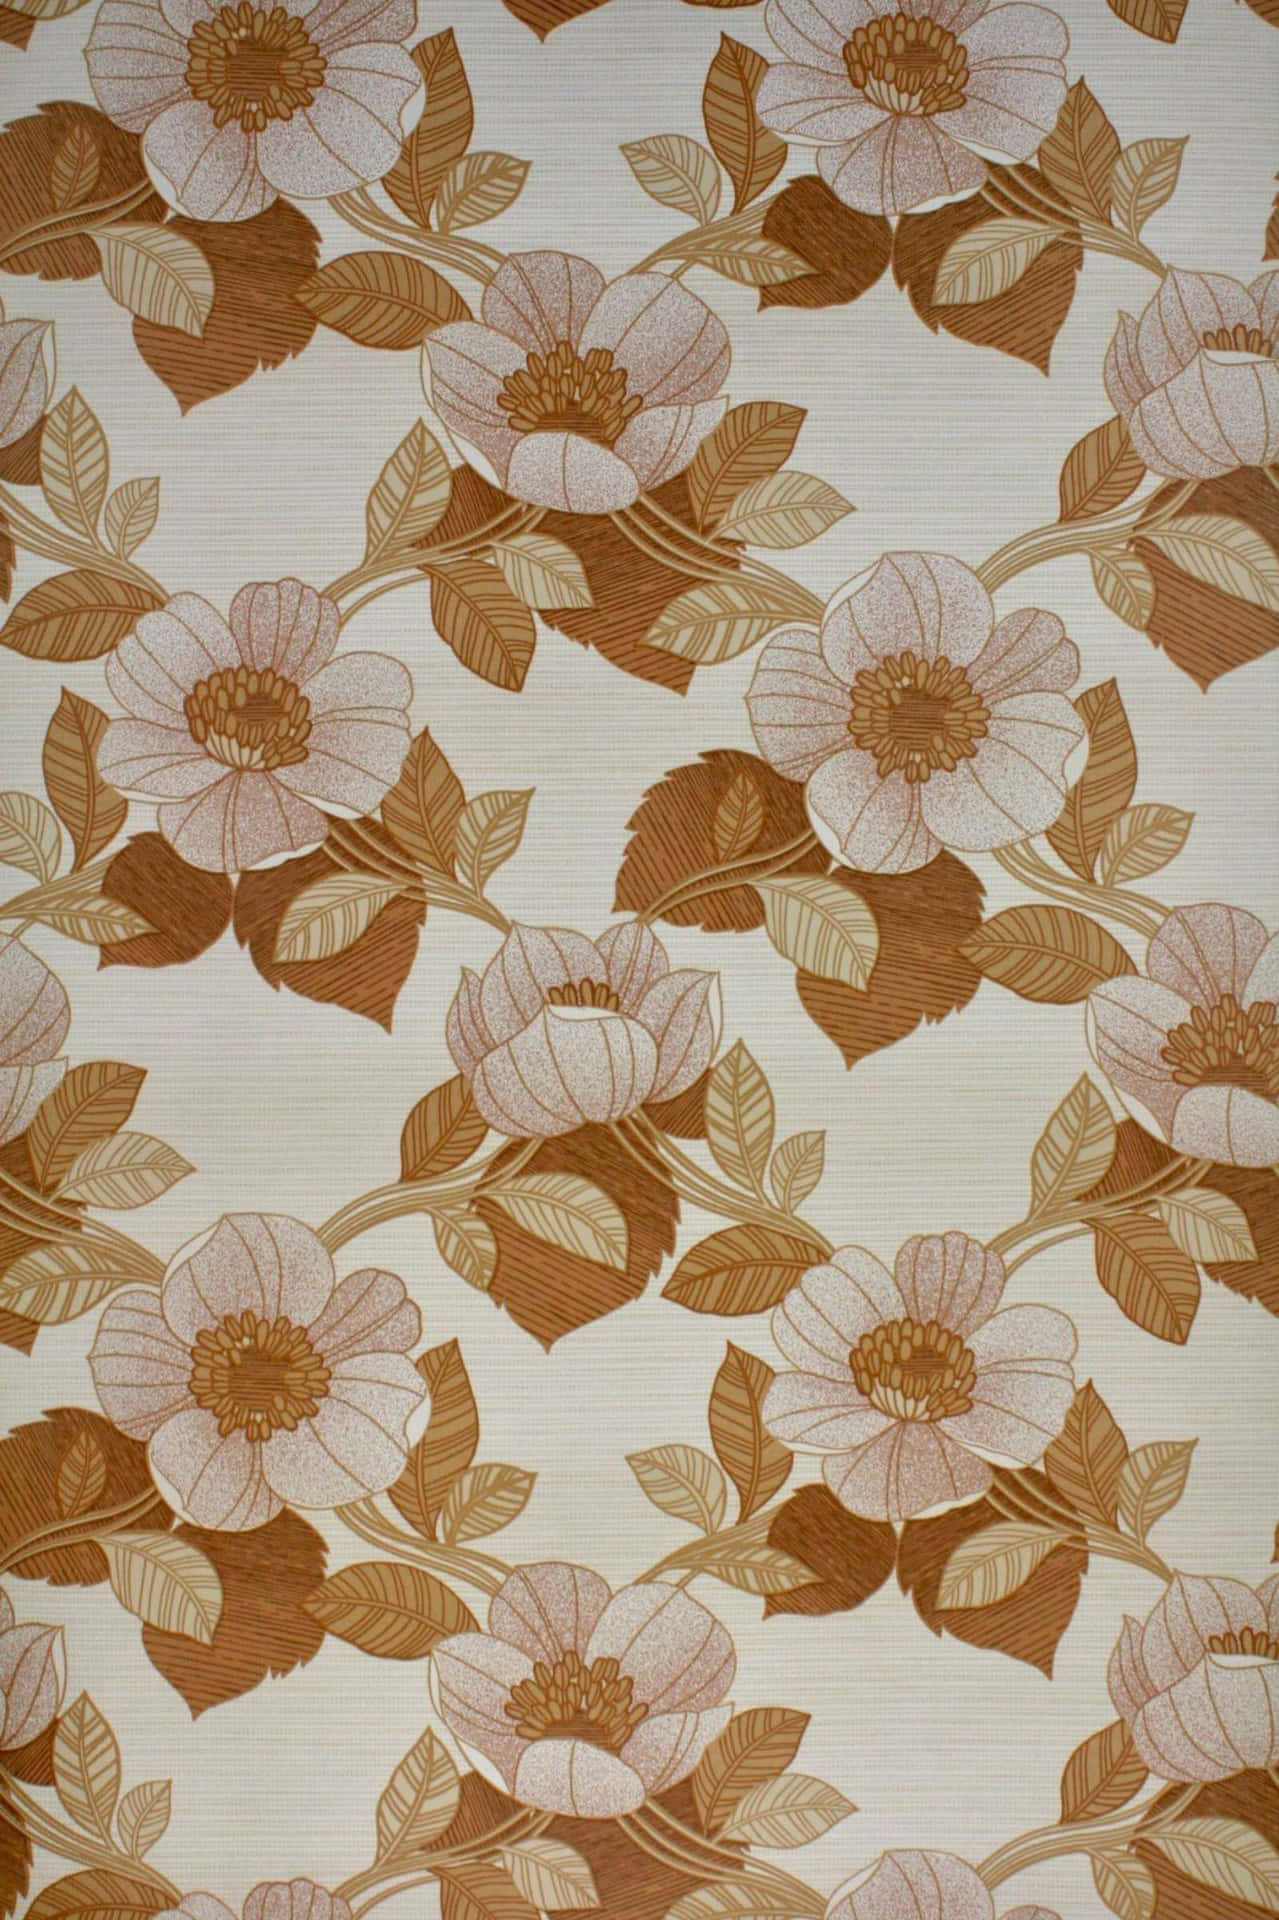 Expressive Floral Design of the 1970s Wallpaper